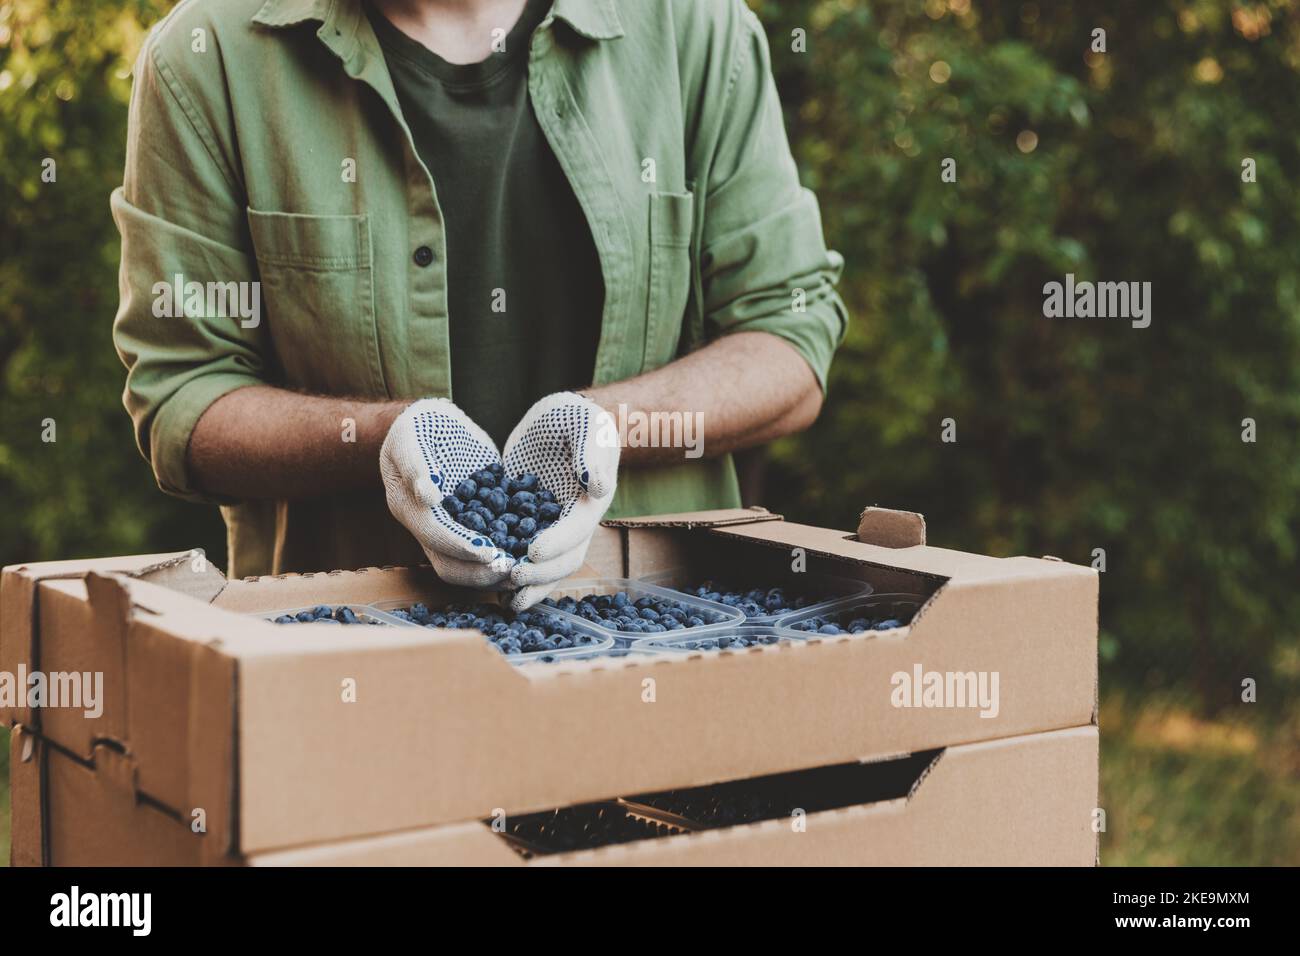 Hands of man wears green clothes holding many large blueberries over cardboard box or crate full of plastic containers with blueberry. Berry shipping, delivery concept. Seller showcase the product Stock Photo